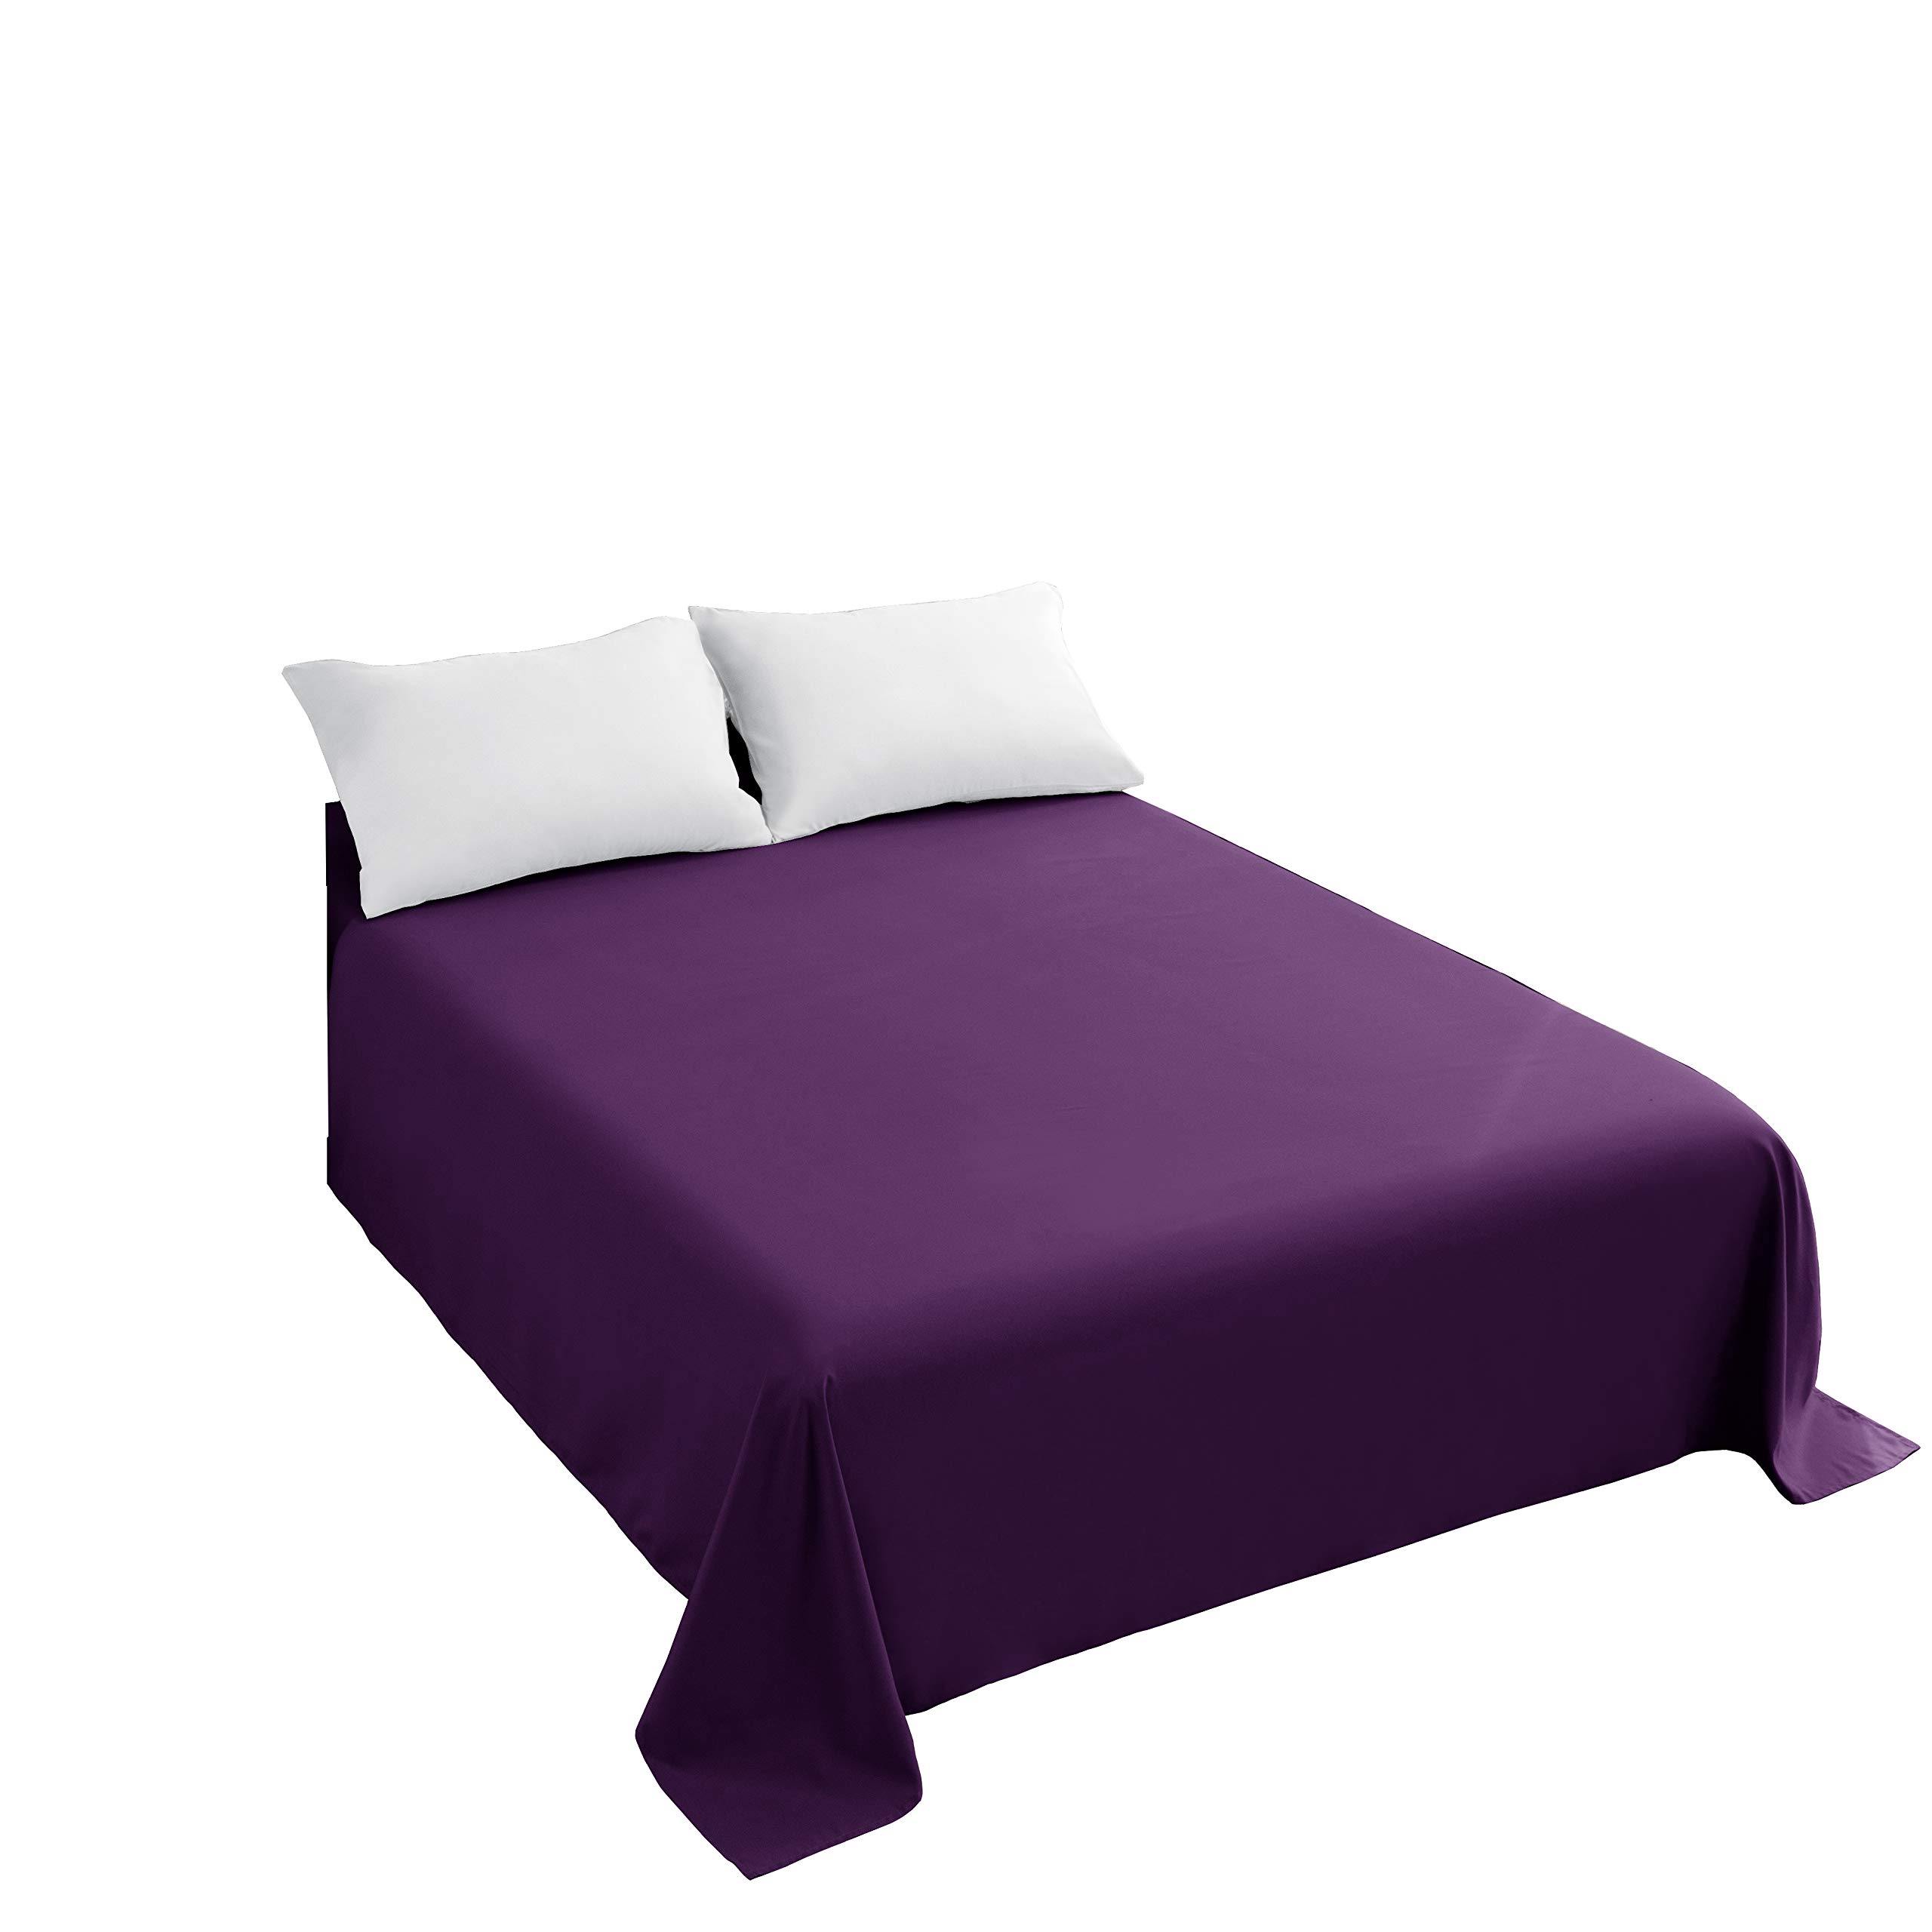 Sfoothome Top Sheet Single - Premium 1500 Ultra-Soft collection - Wrinkle Resistant, Easy care (King, Purple)